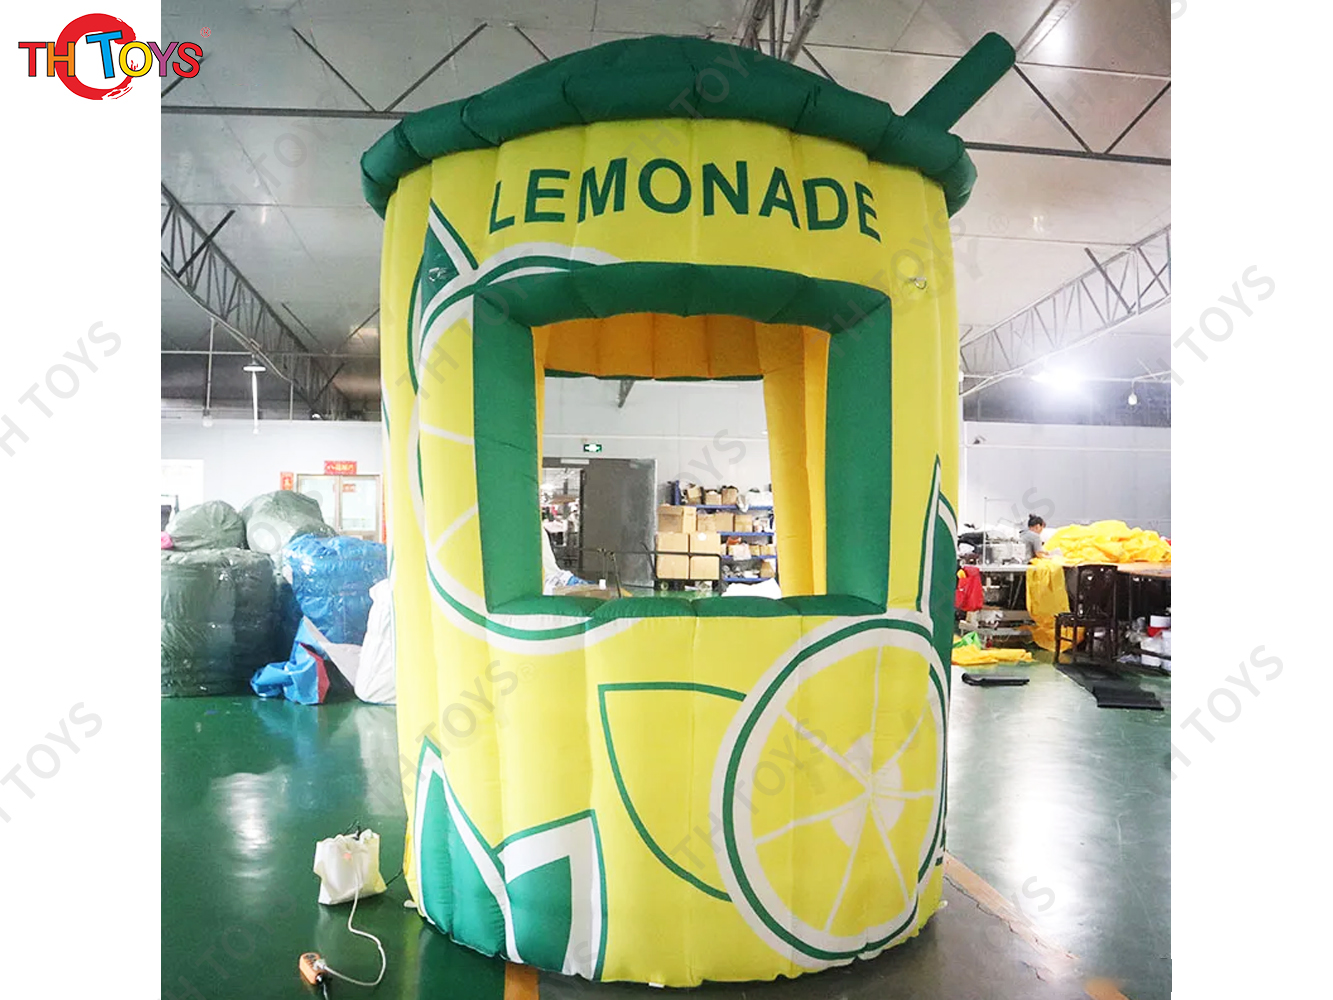 2.5m Tall Customized inflatable lemonade selling stand booth lemon concession kiosk stall/vendor drink space for lemon promotion